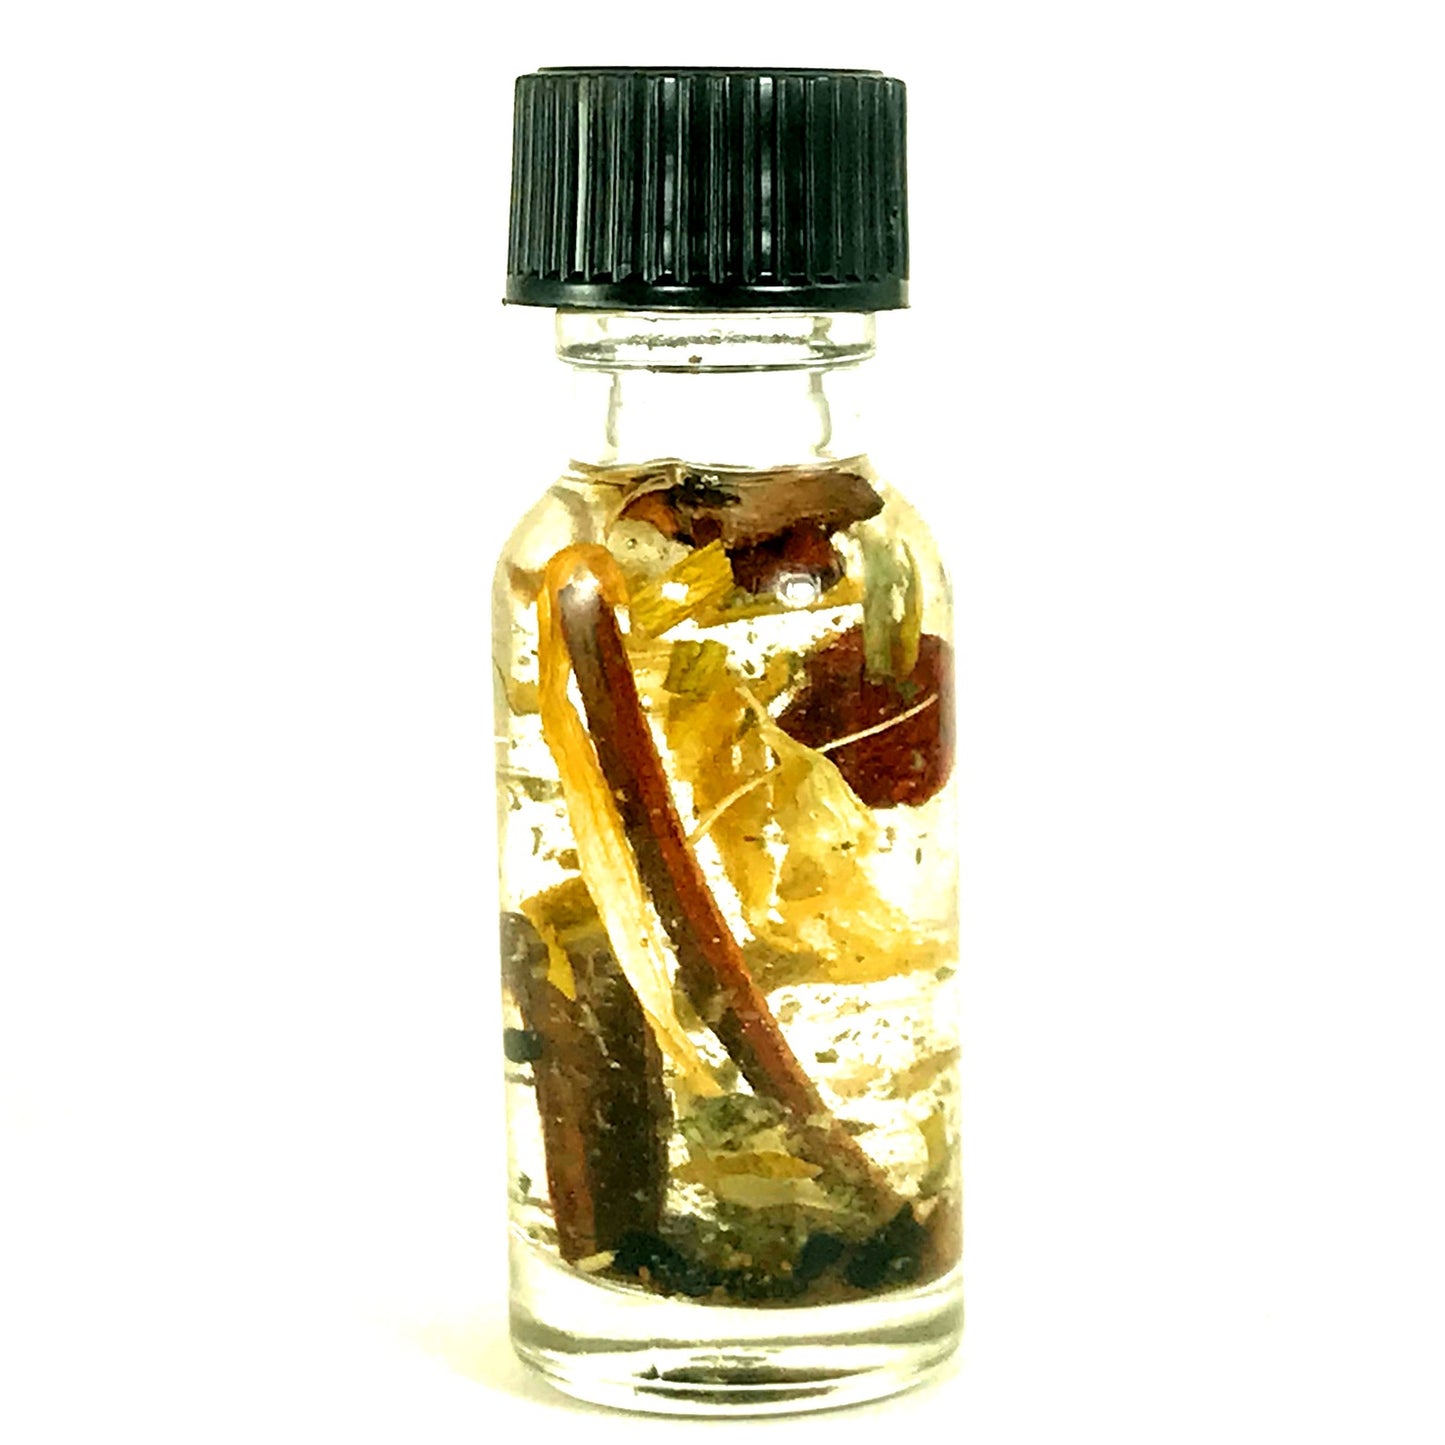 Twichery Business Success Oil helps you meet your entrepreneurial and business goals. Hoodoo Voodoo Pagan Wicca